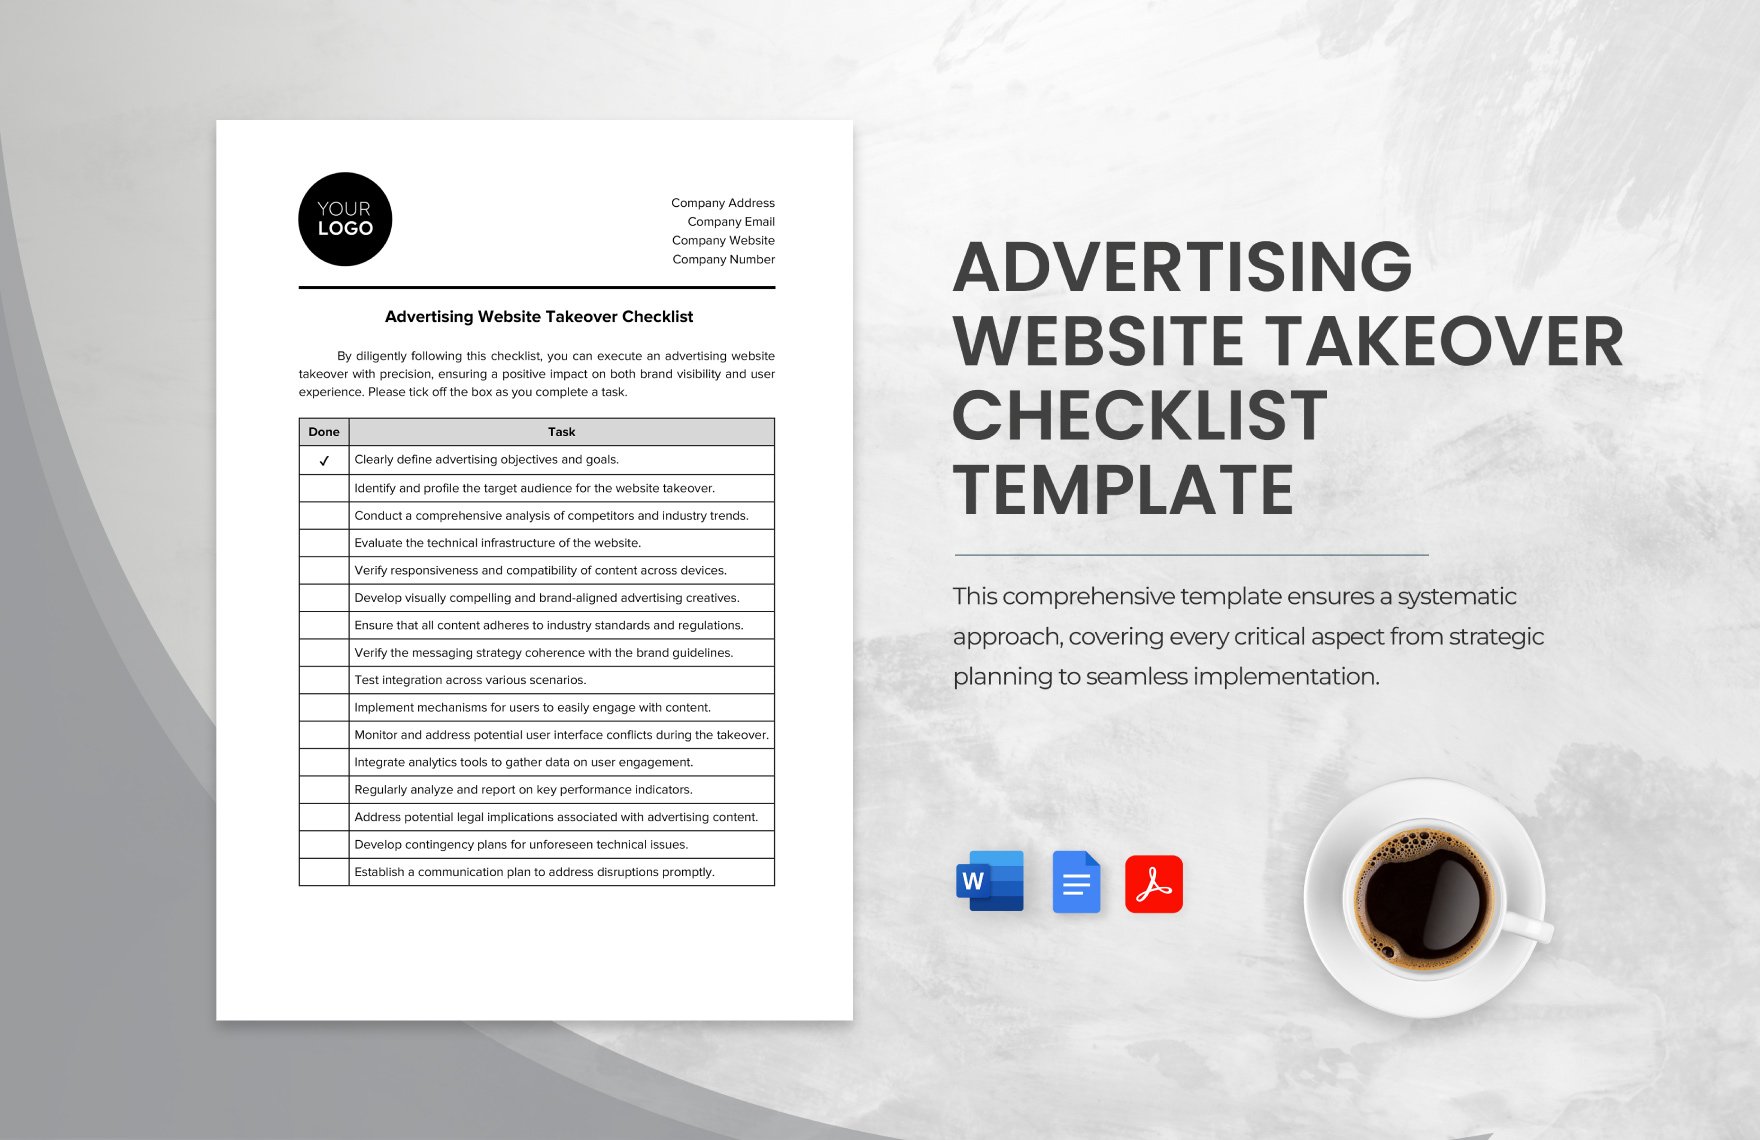 Advertising Website Takeover Checklist Template in Word, Google Docs, PDF